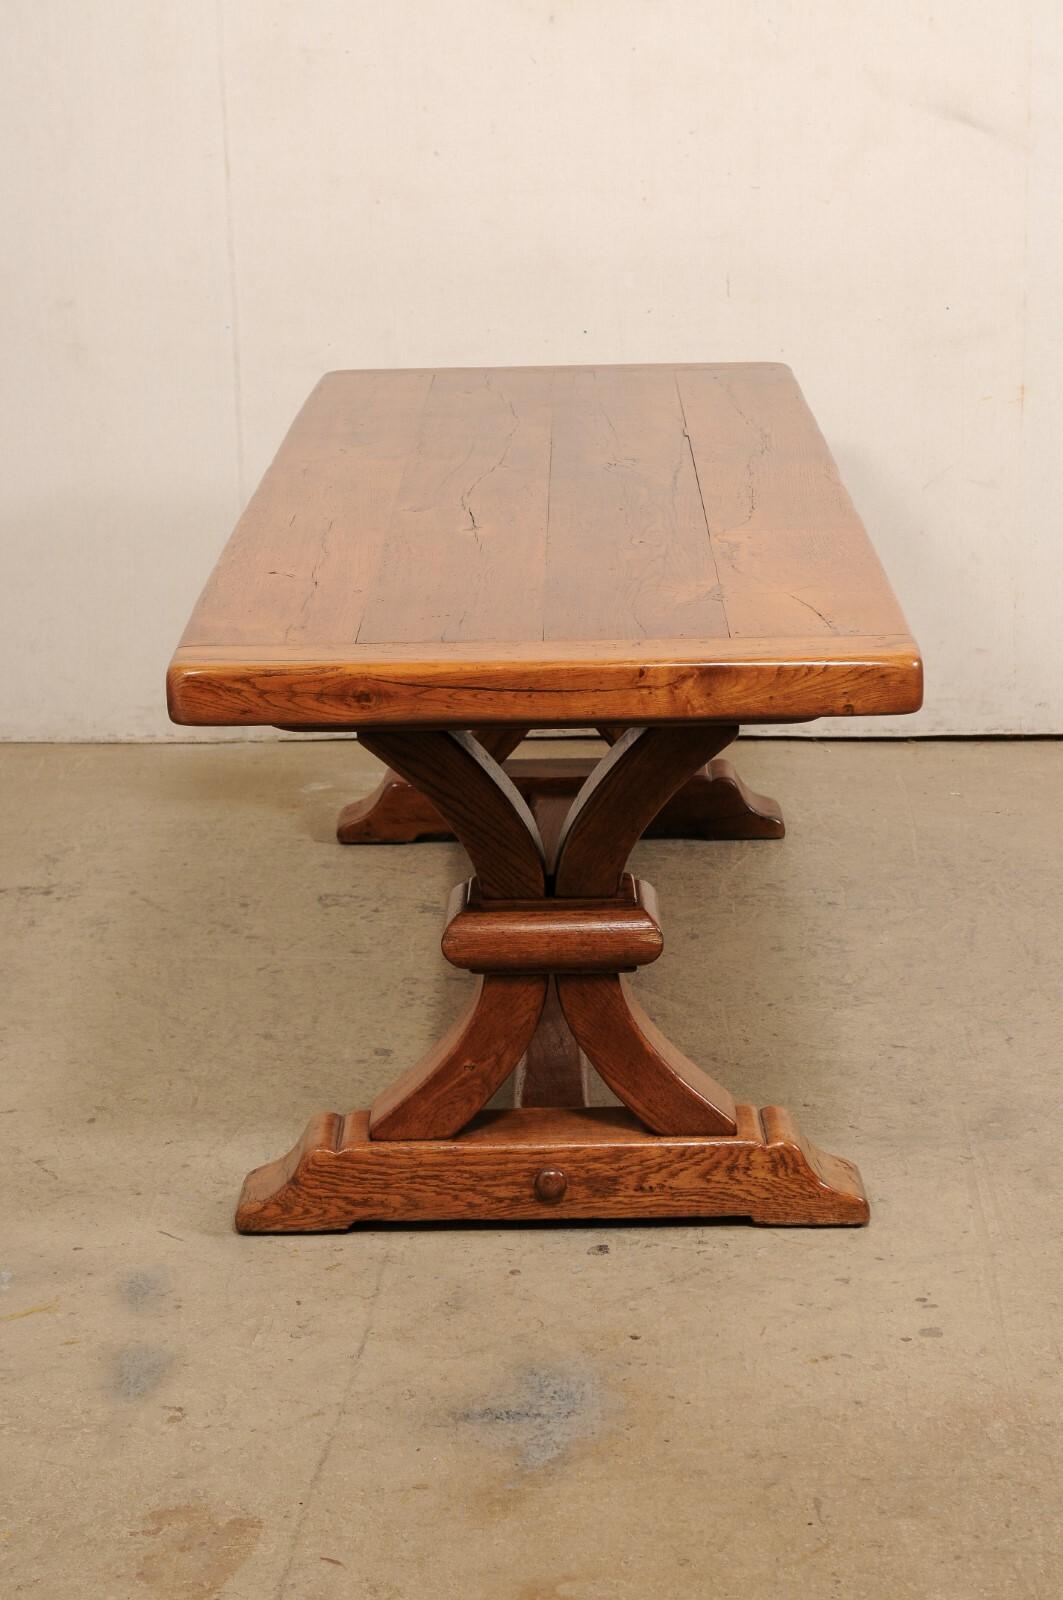 Fruitwood Antique French Wooden Dining Table w/Nicely Carved Trestle Legs, 7+ Ft Long For Sale